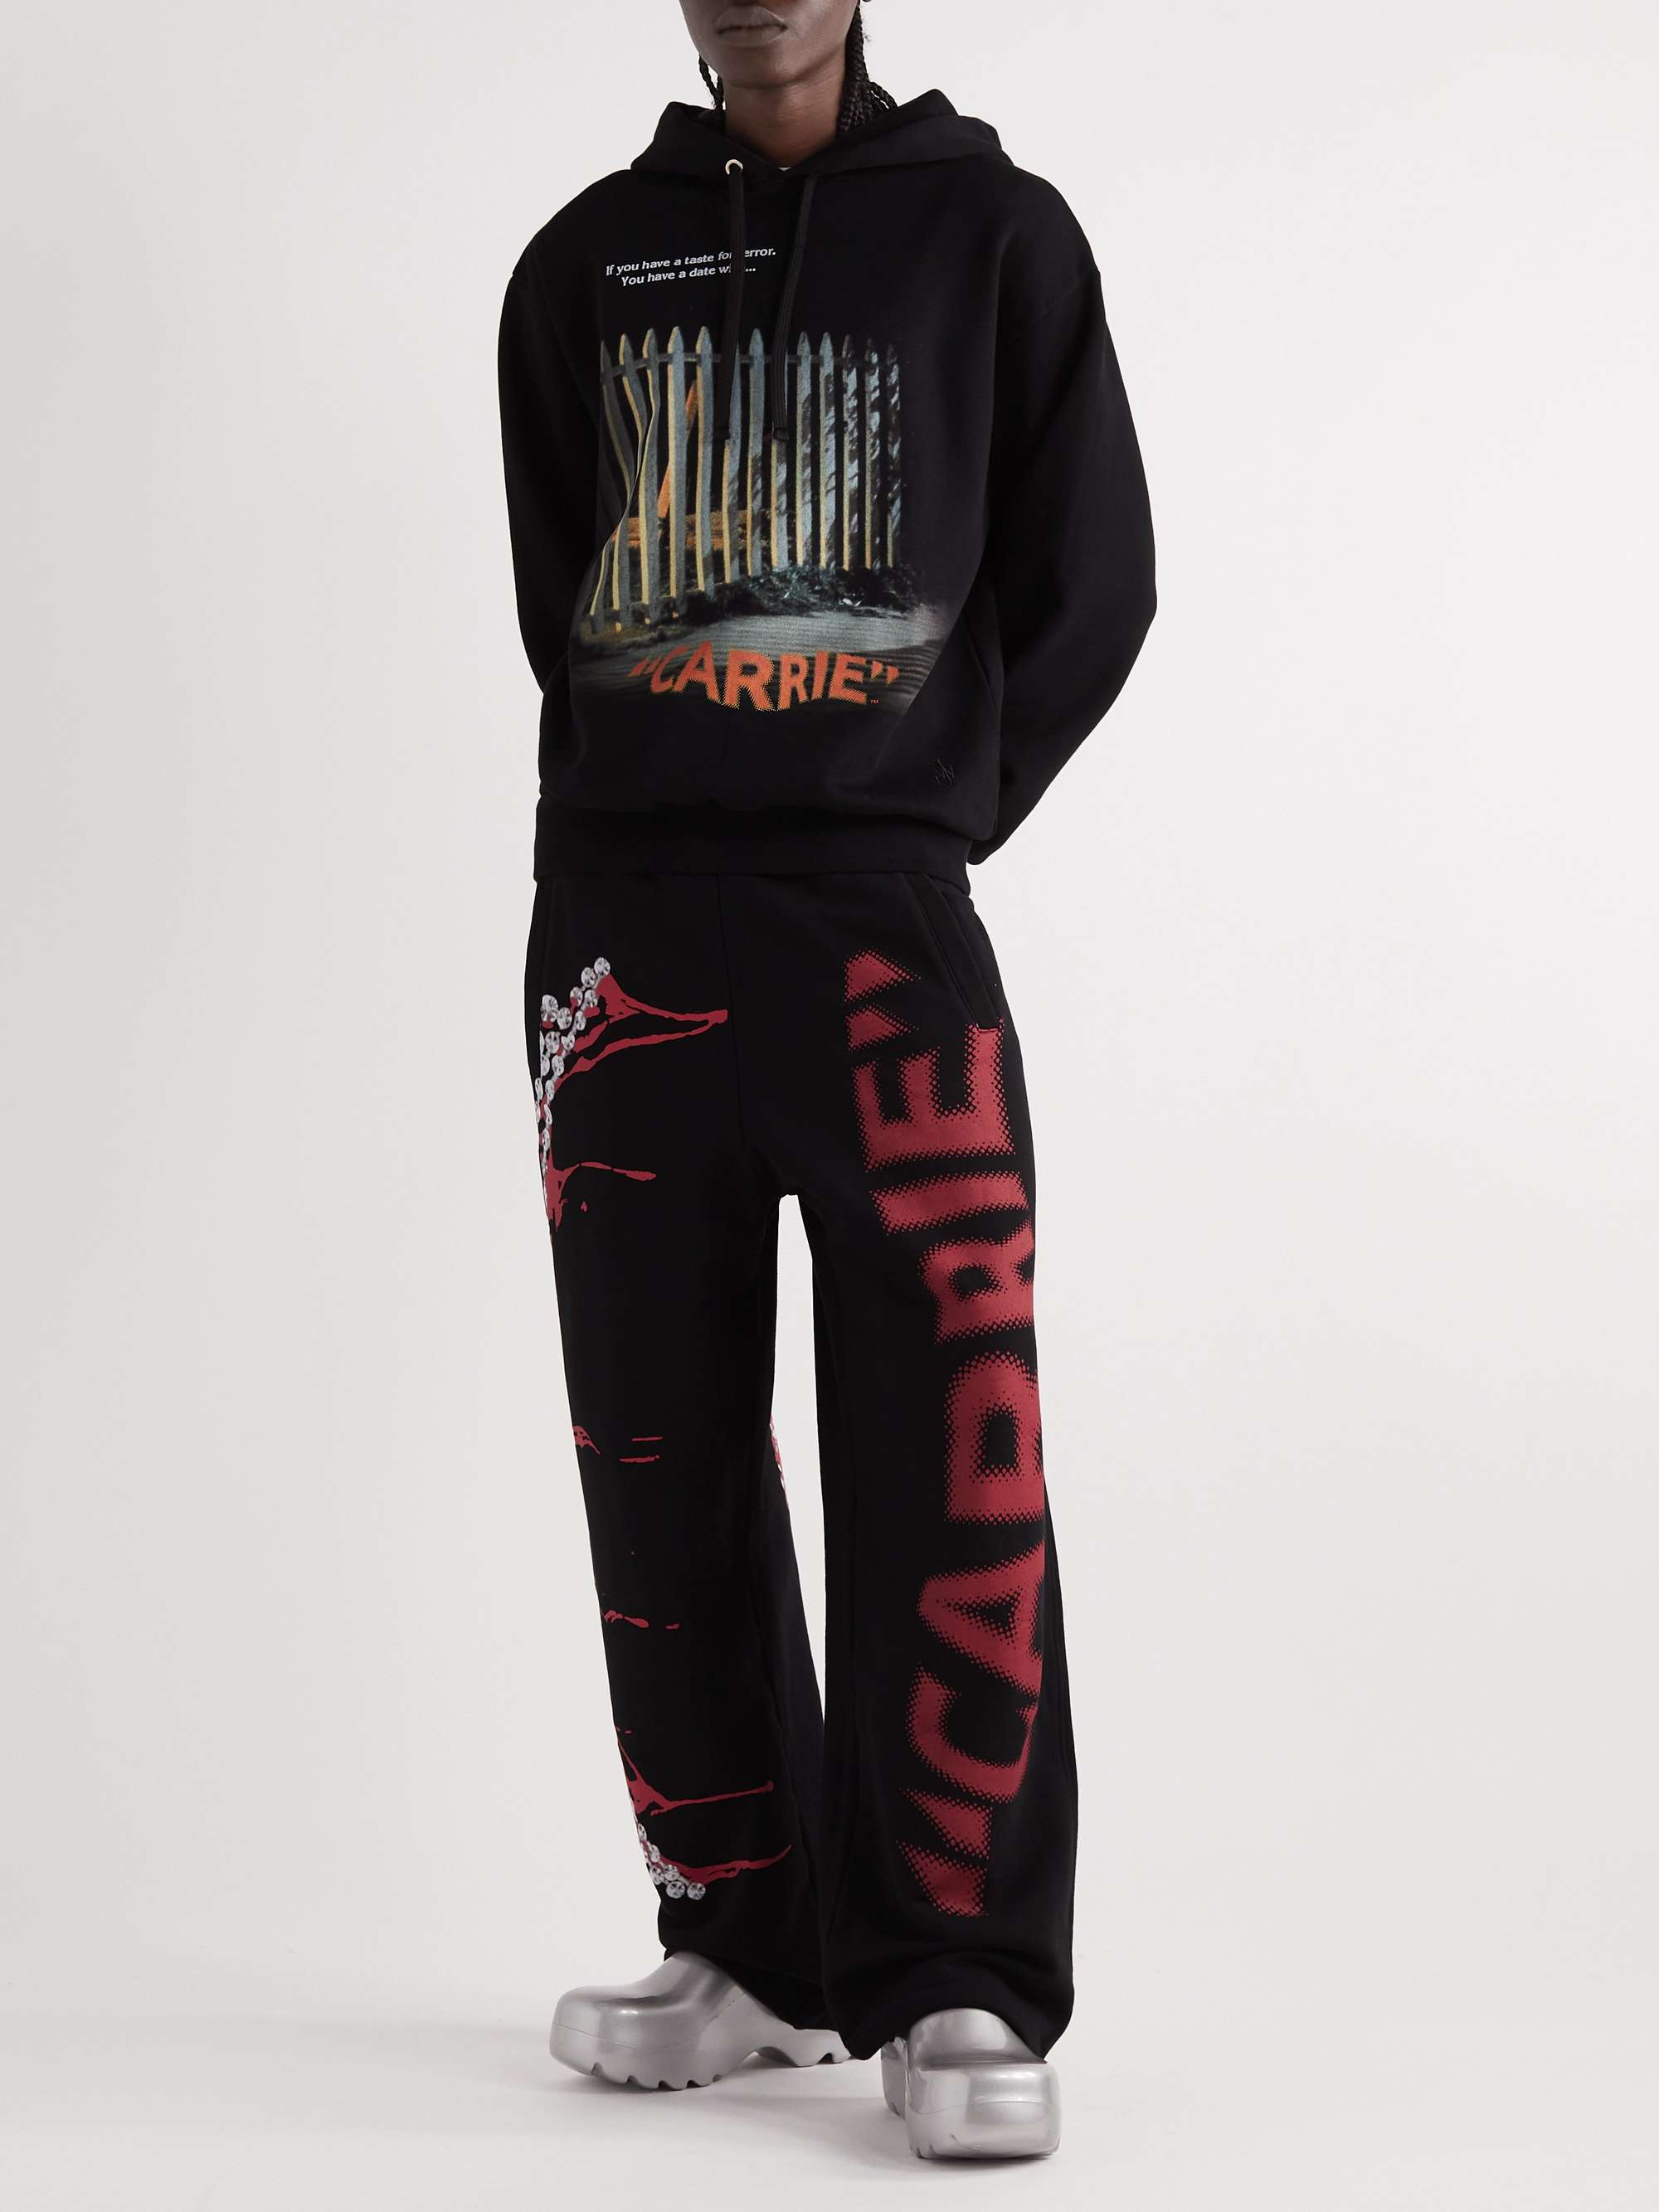 JW ANDERSON + Carrie Tiara Tapered Printed Cotton-Jersey Sweatpants